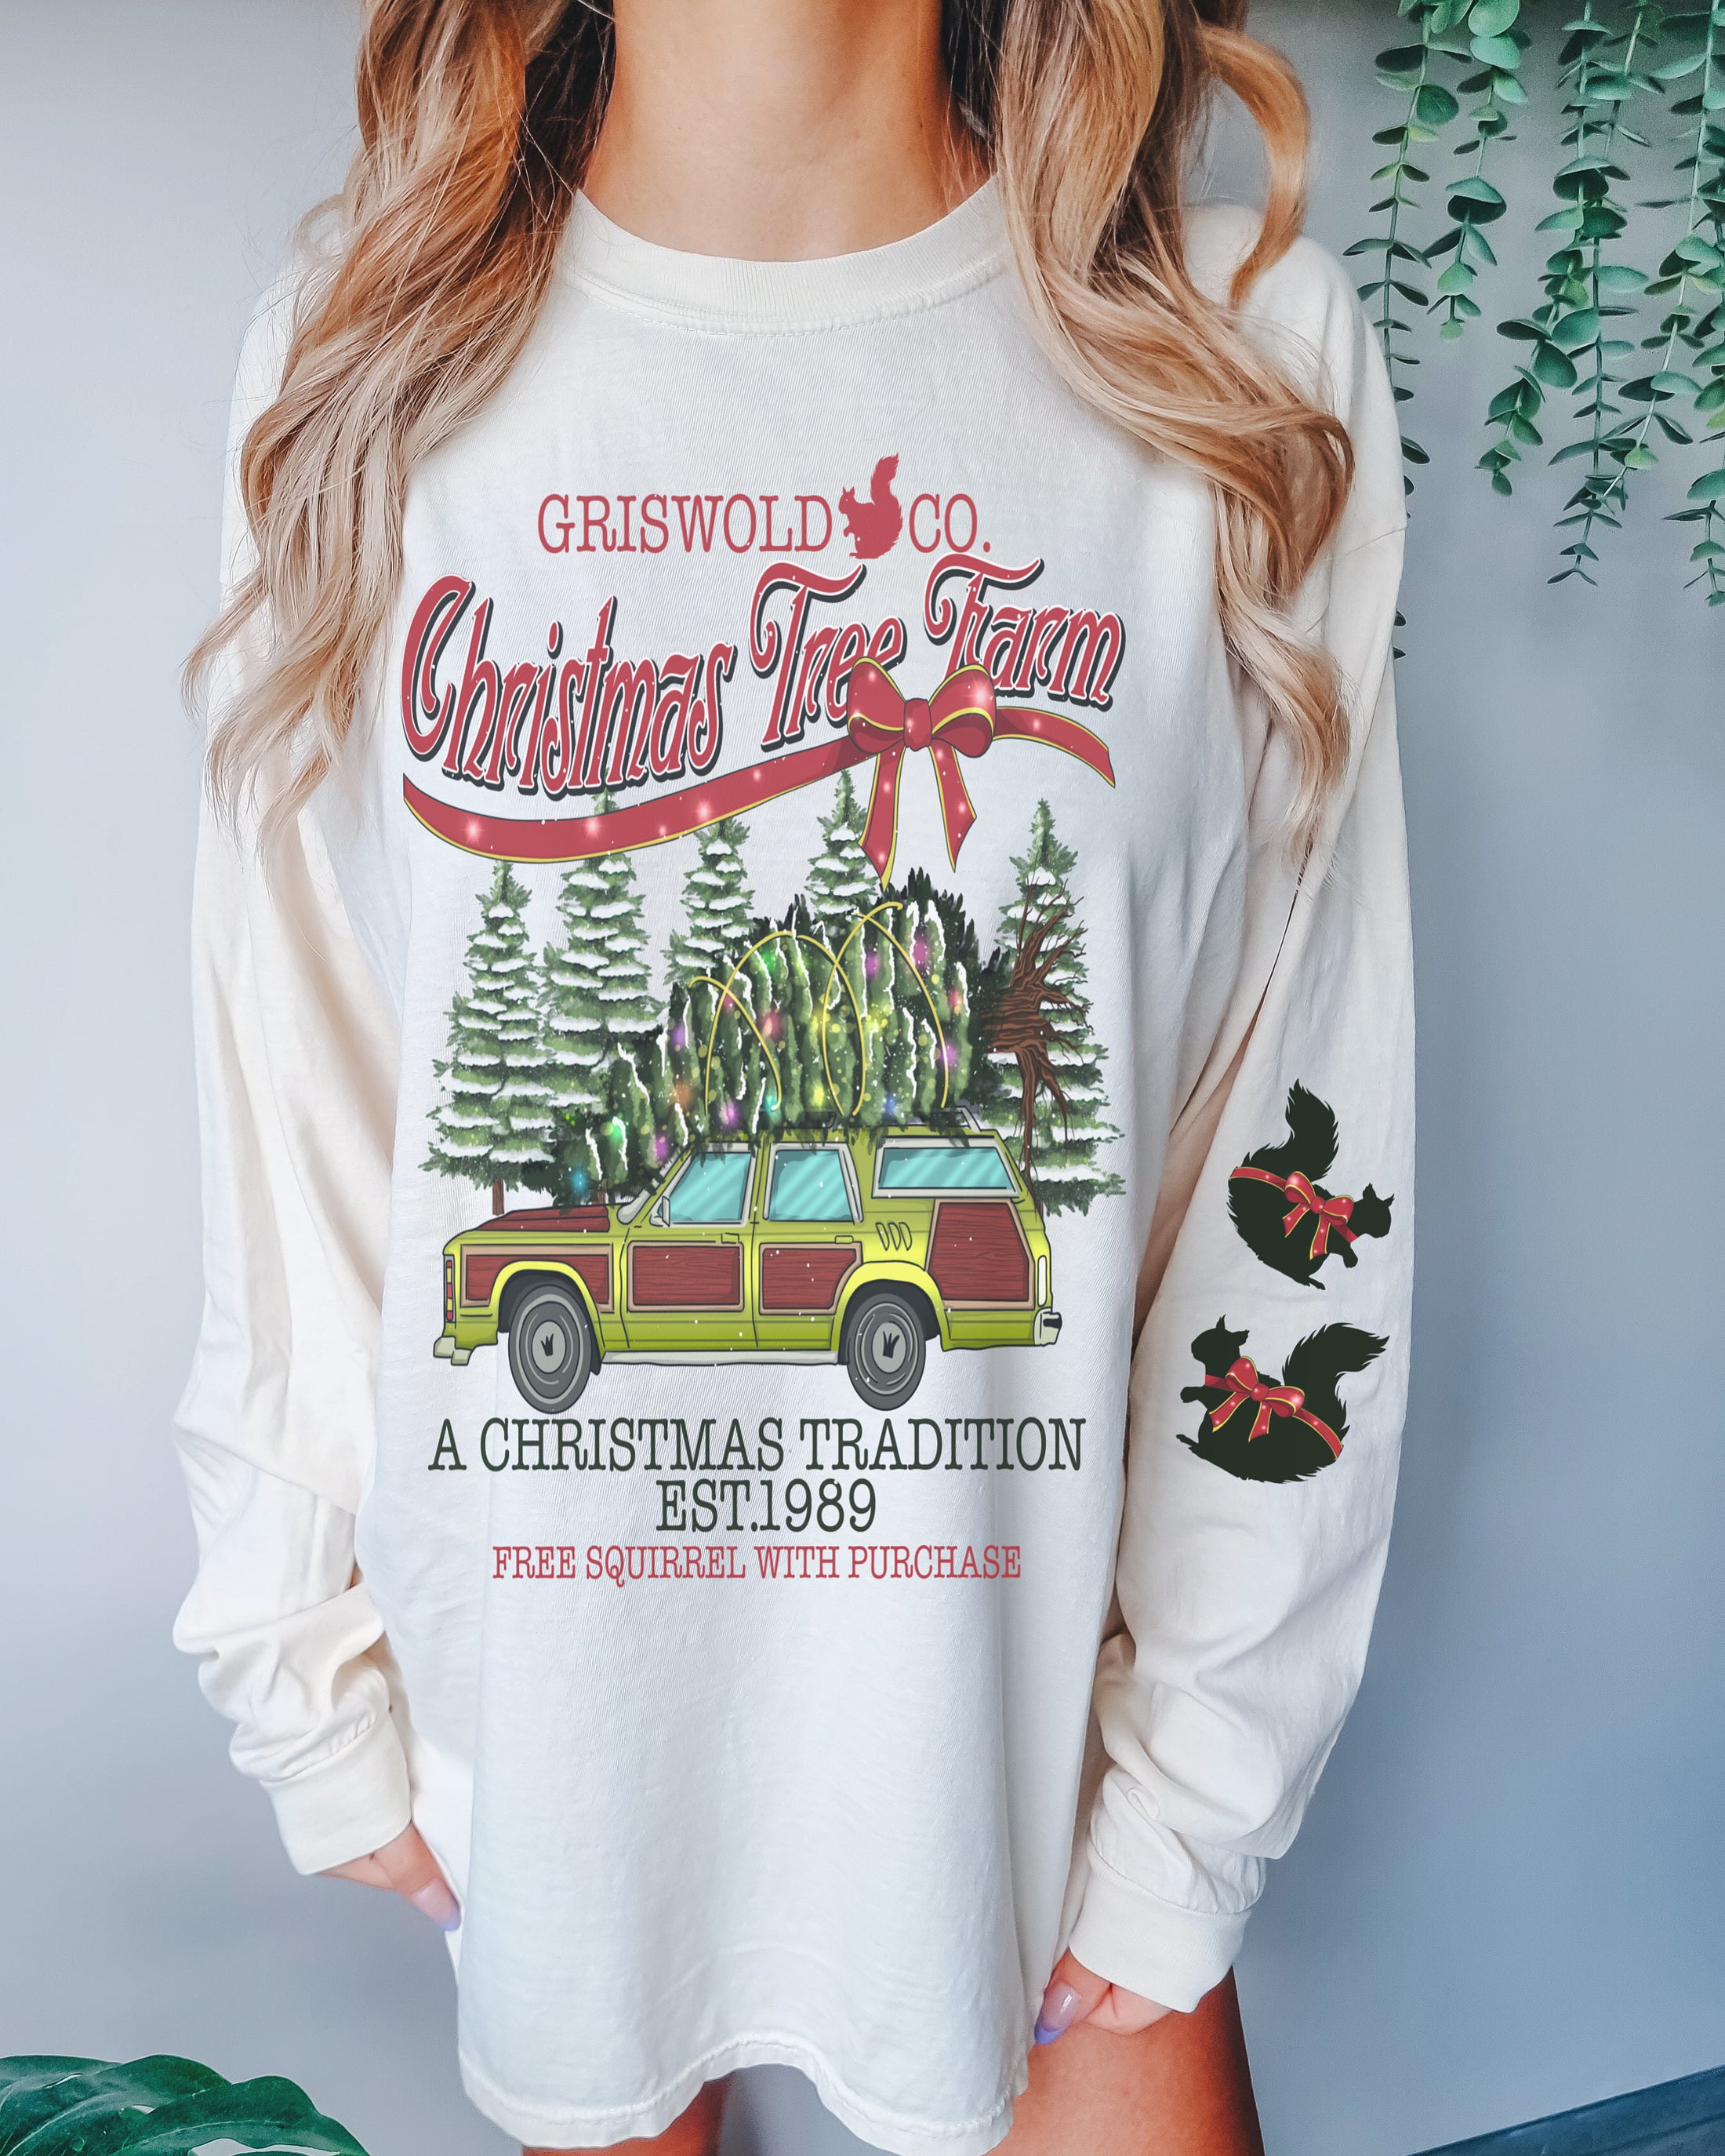 Griswold Sleeve Tee